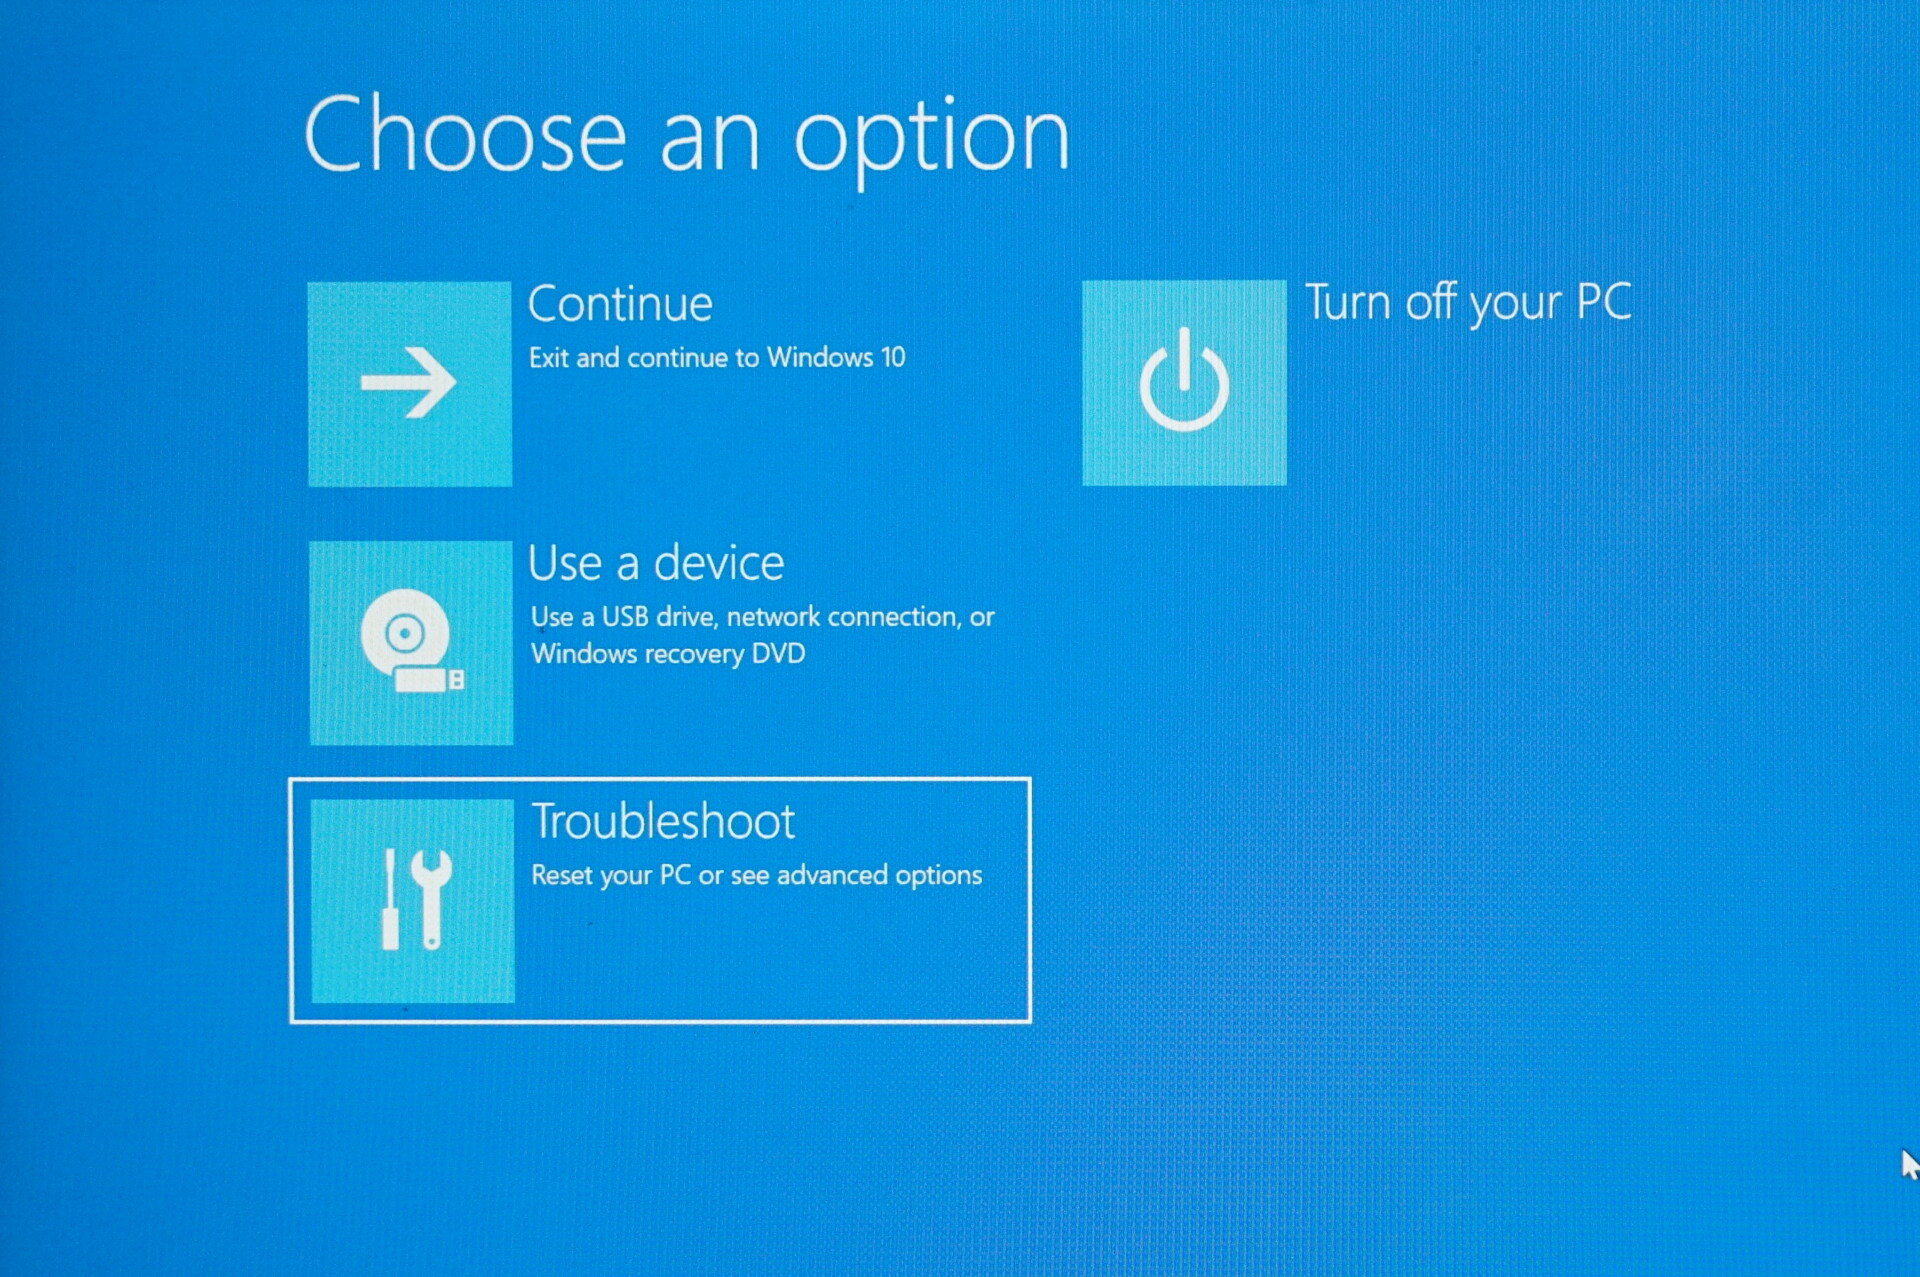 Windows 10 troubleshoot - how to do a System Restore on Windows 10